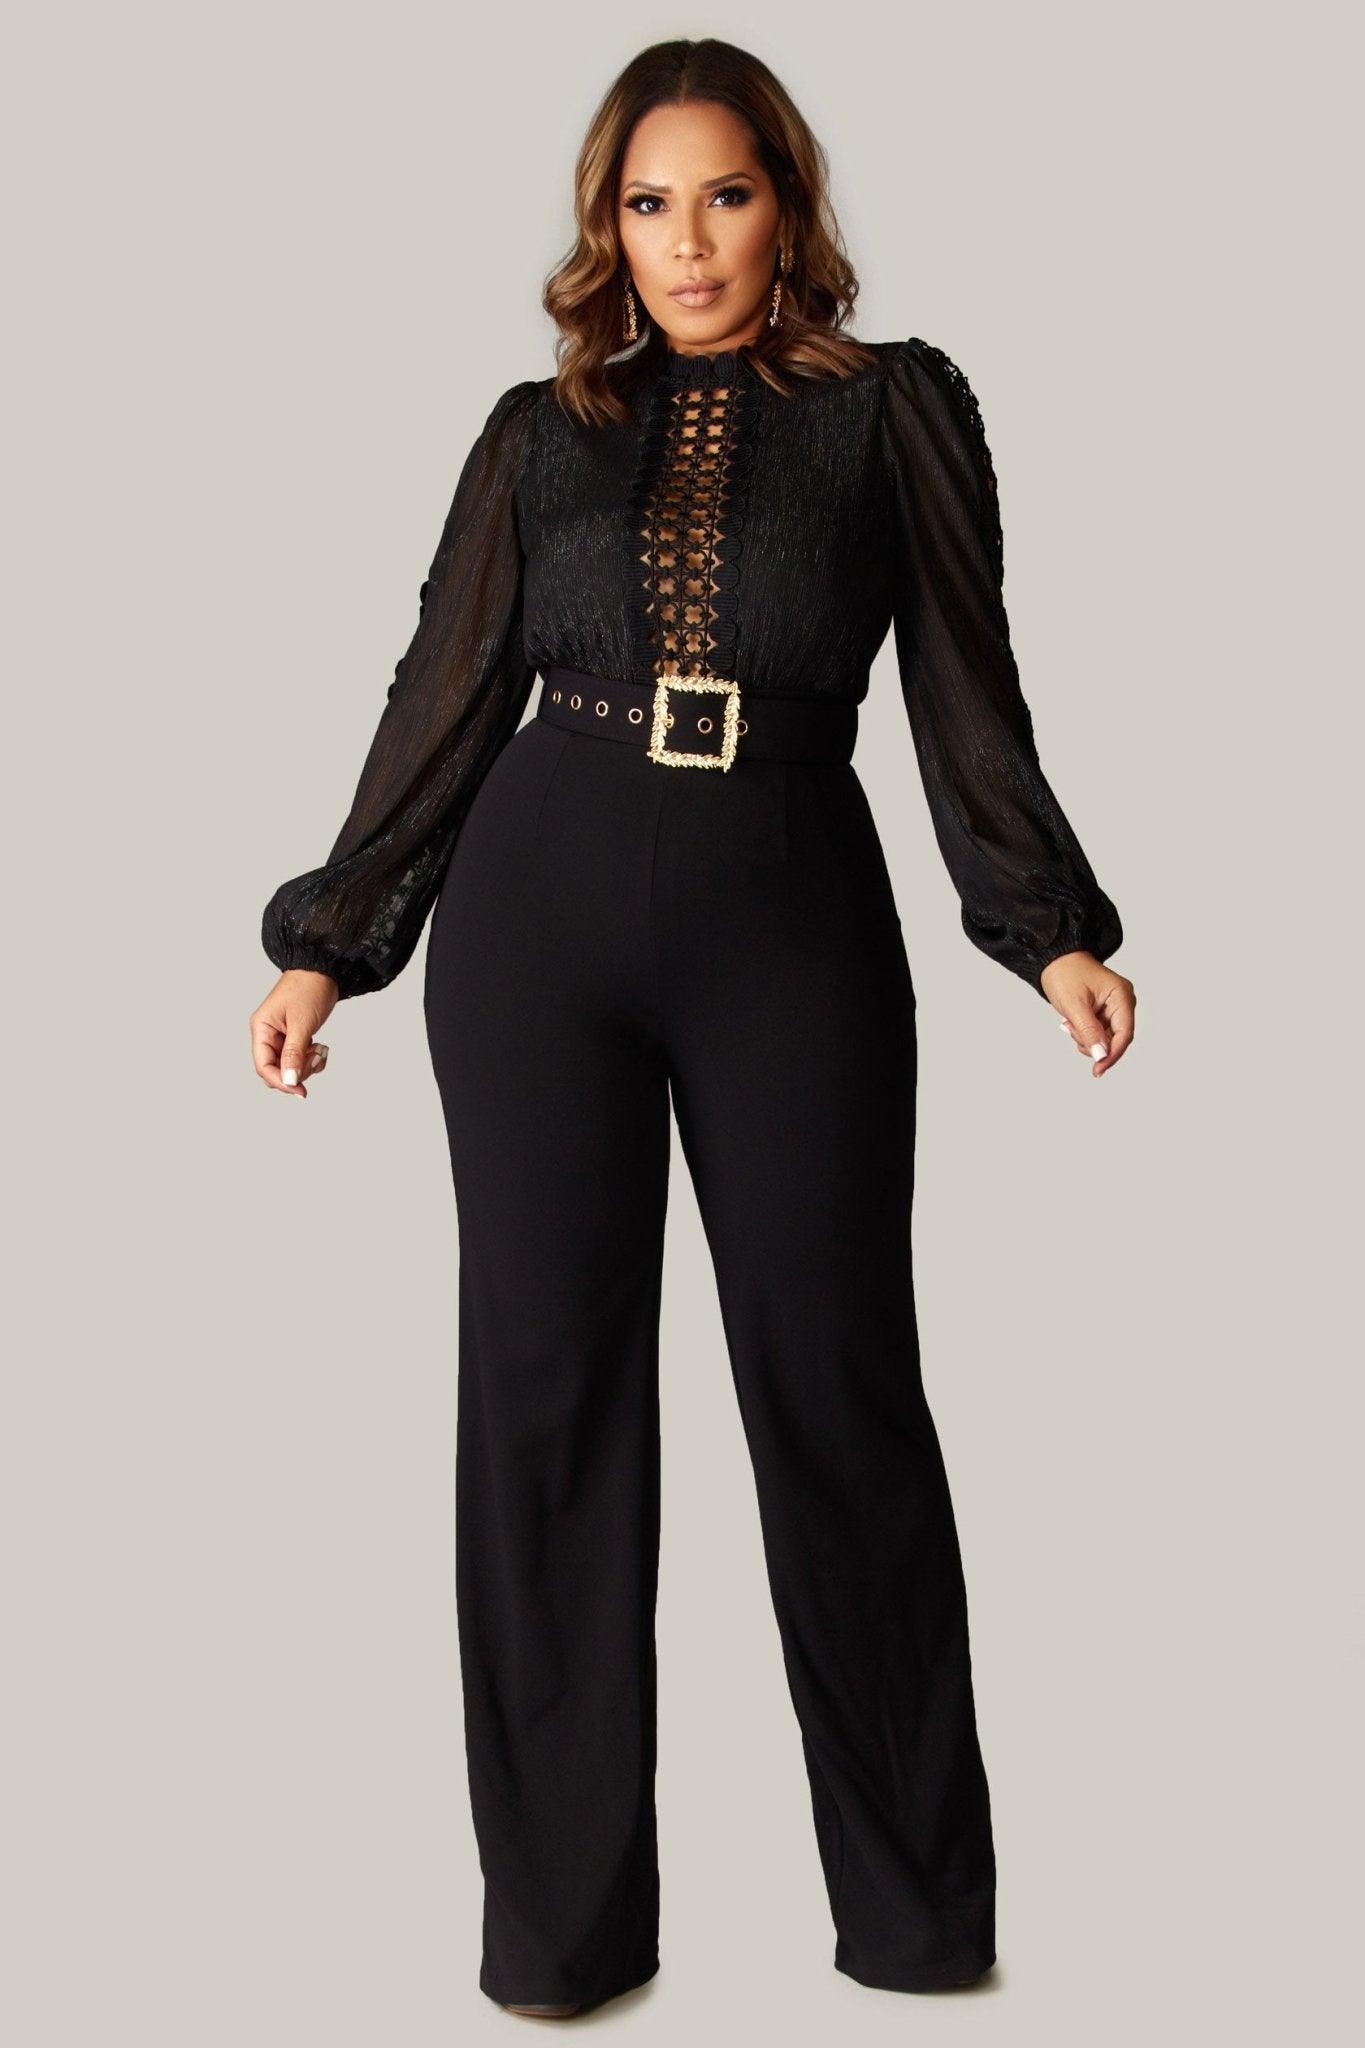 Clementine Long Sleeves Belted Jumpsuit - MY SEXY STYLES